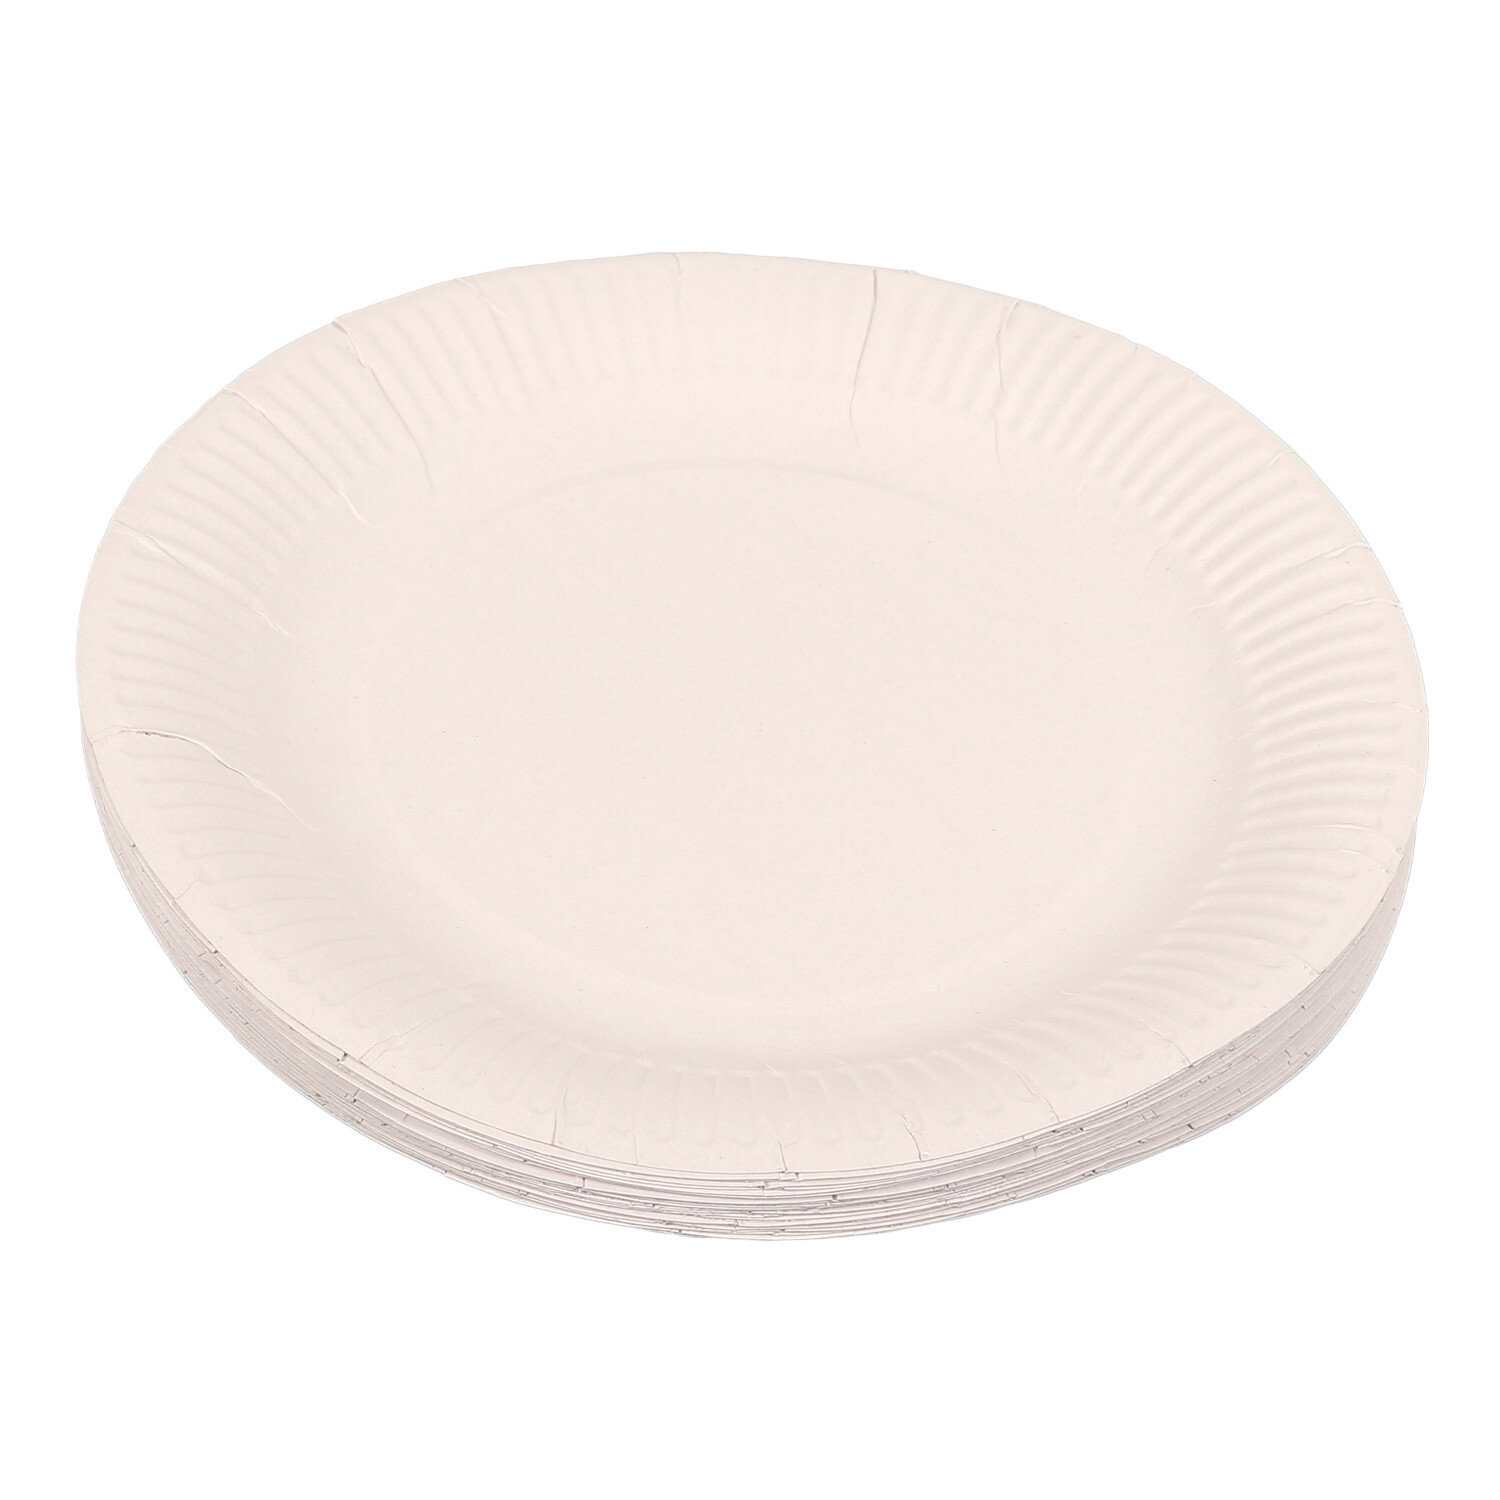 Pack of MyHome Paper Plates - White Image 2